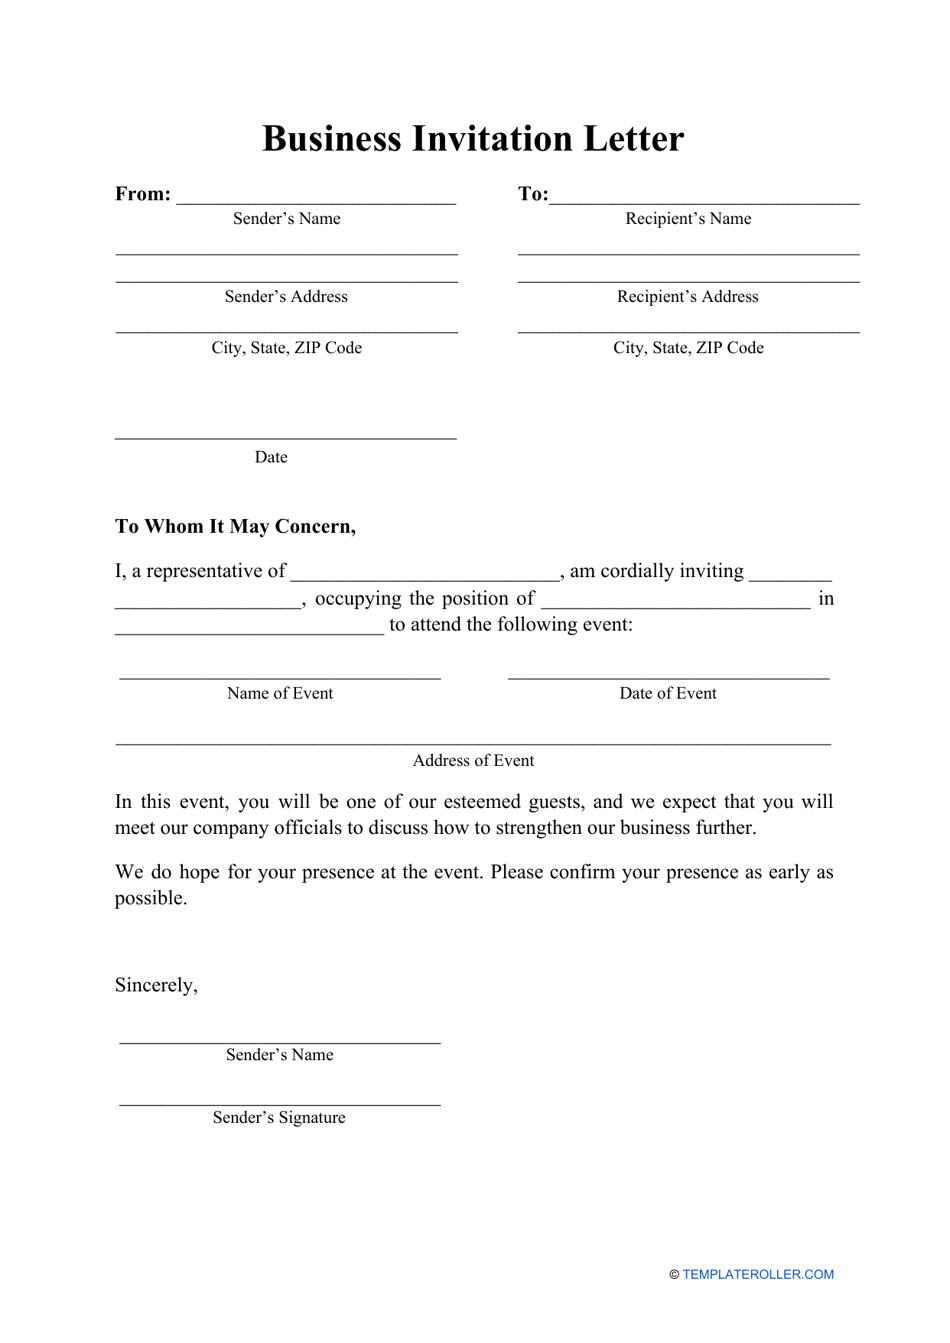 Business Invitation Letter Template, Page 1